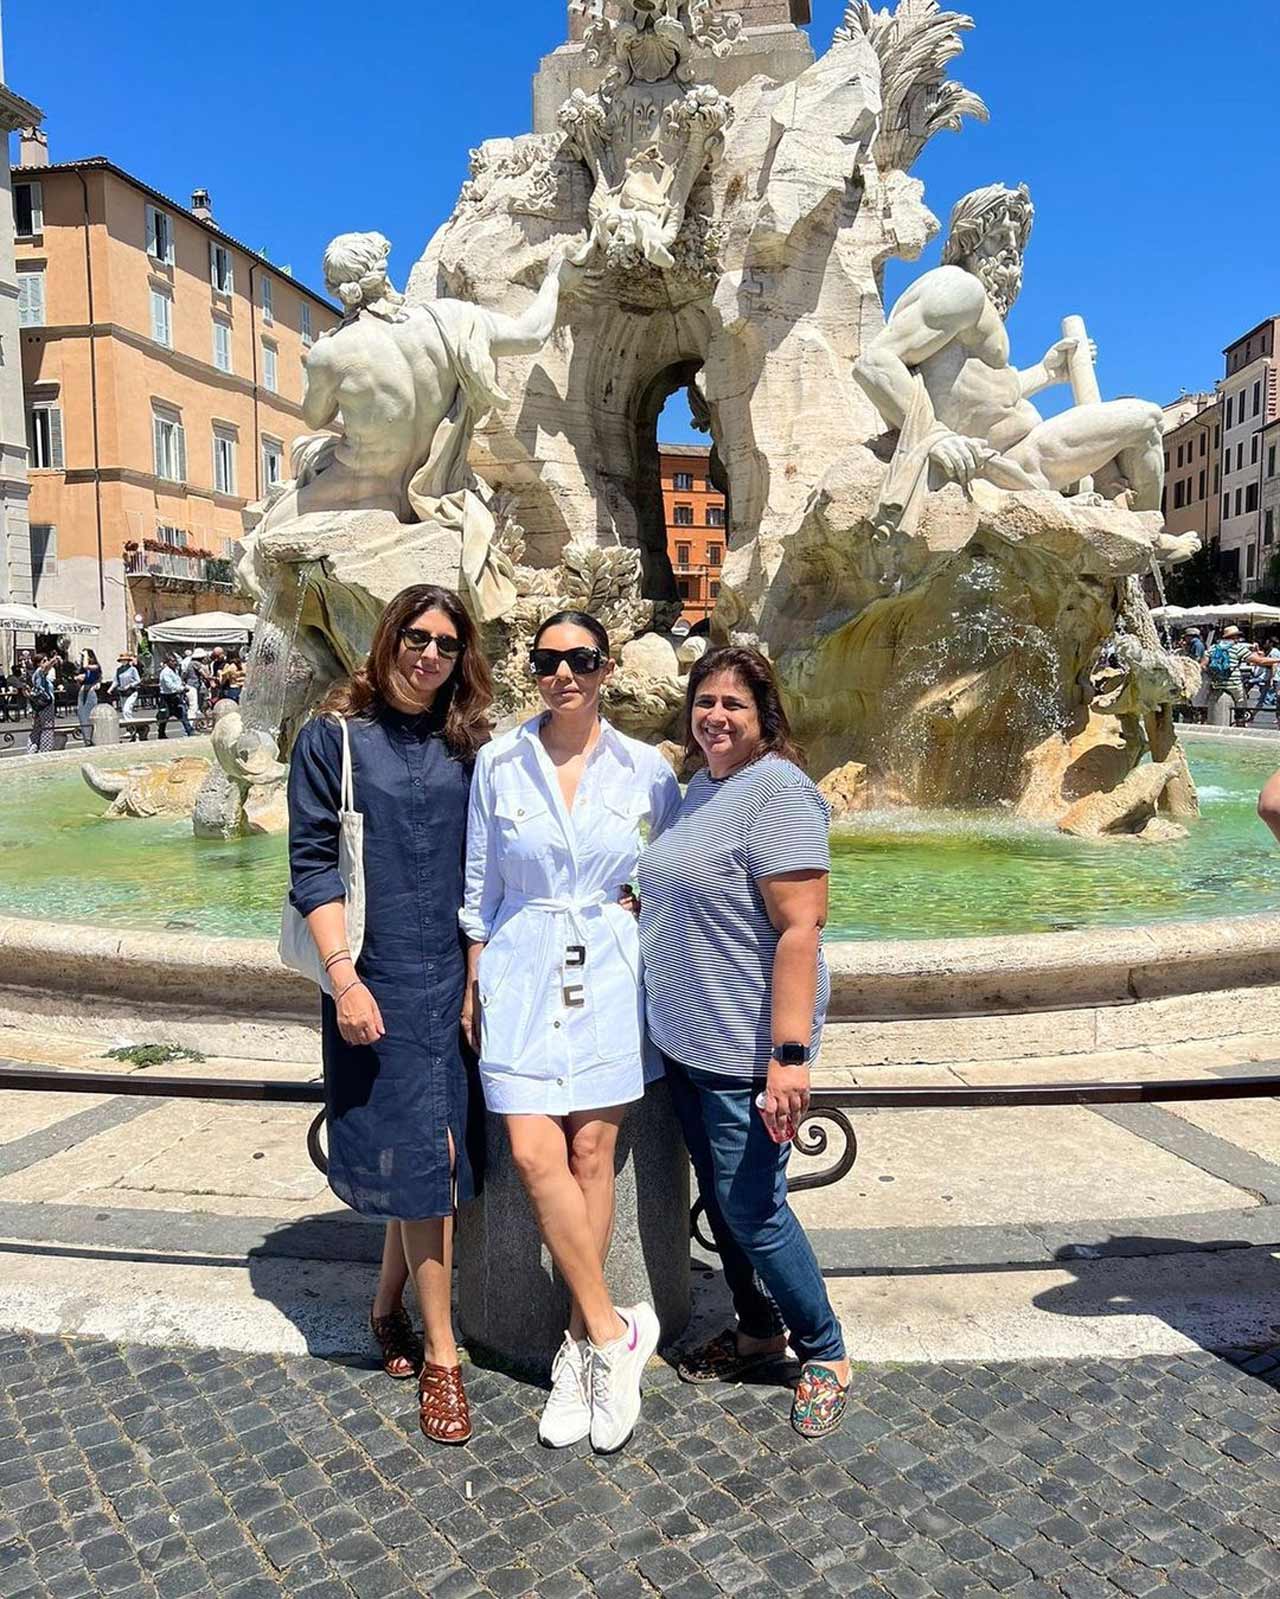 Gauri Khan gave a glimpse of her Rome trip by sharing a few pictures of the monuments. Gauri was seen sporting a cute white short dress while Shweta was seen wearing a blue outfit